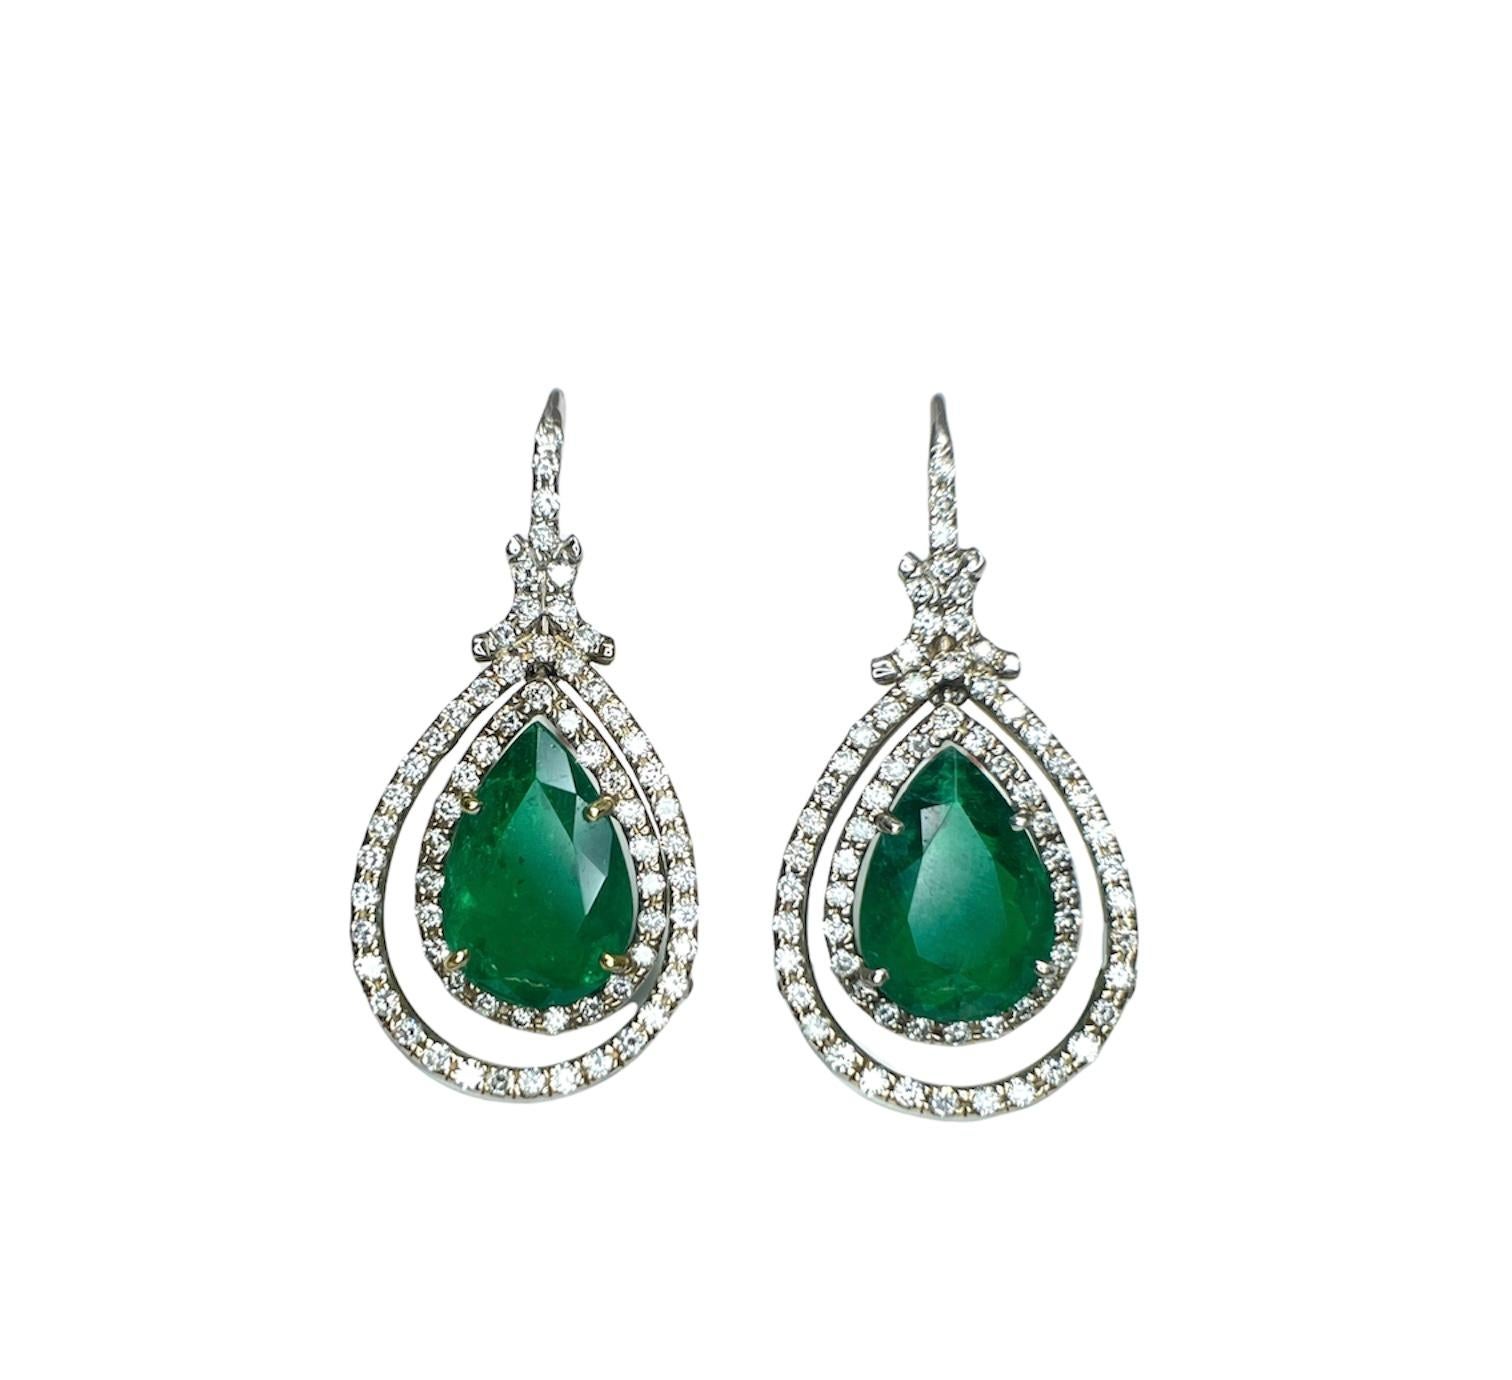 Stunning hand-made double halo pear shape emerald earrings. The earrings feature two natural pear shape emeralds weighing a total of 4.25 ct. The earrings also have round brilliant cut diamonds surrounding the pear shapes weighing 1.30 ct and graded